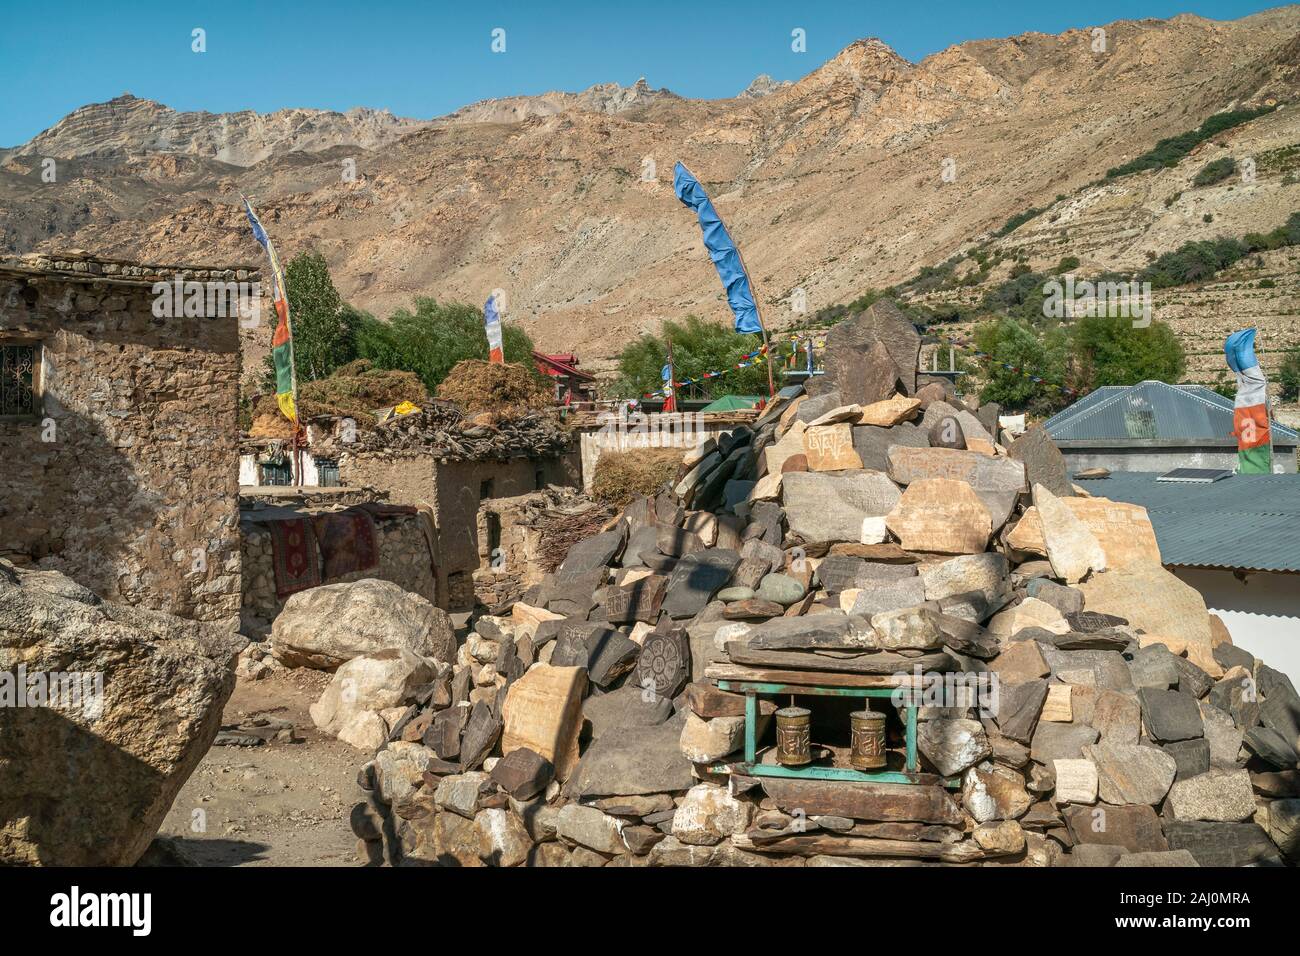 Street flanked by religious symbols, houses, prayer flags, and stone boulder, with Himalayas as backdrop on sunny day in Nako, Himachal Pradesh, India. Stock Photo